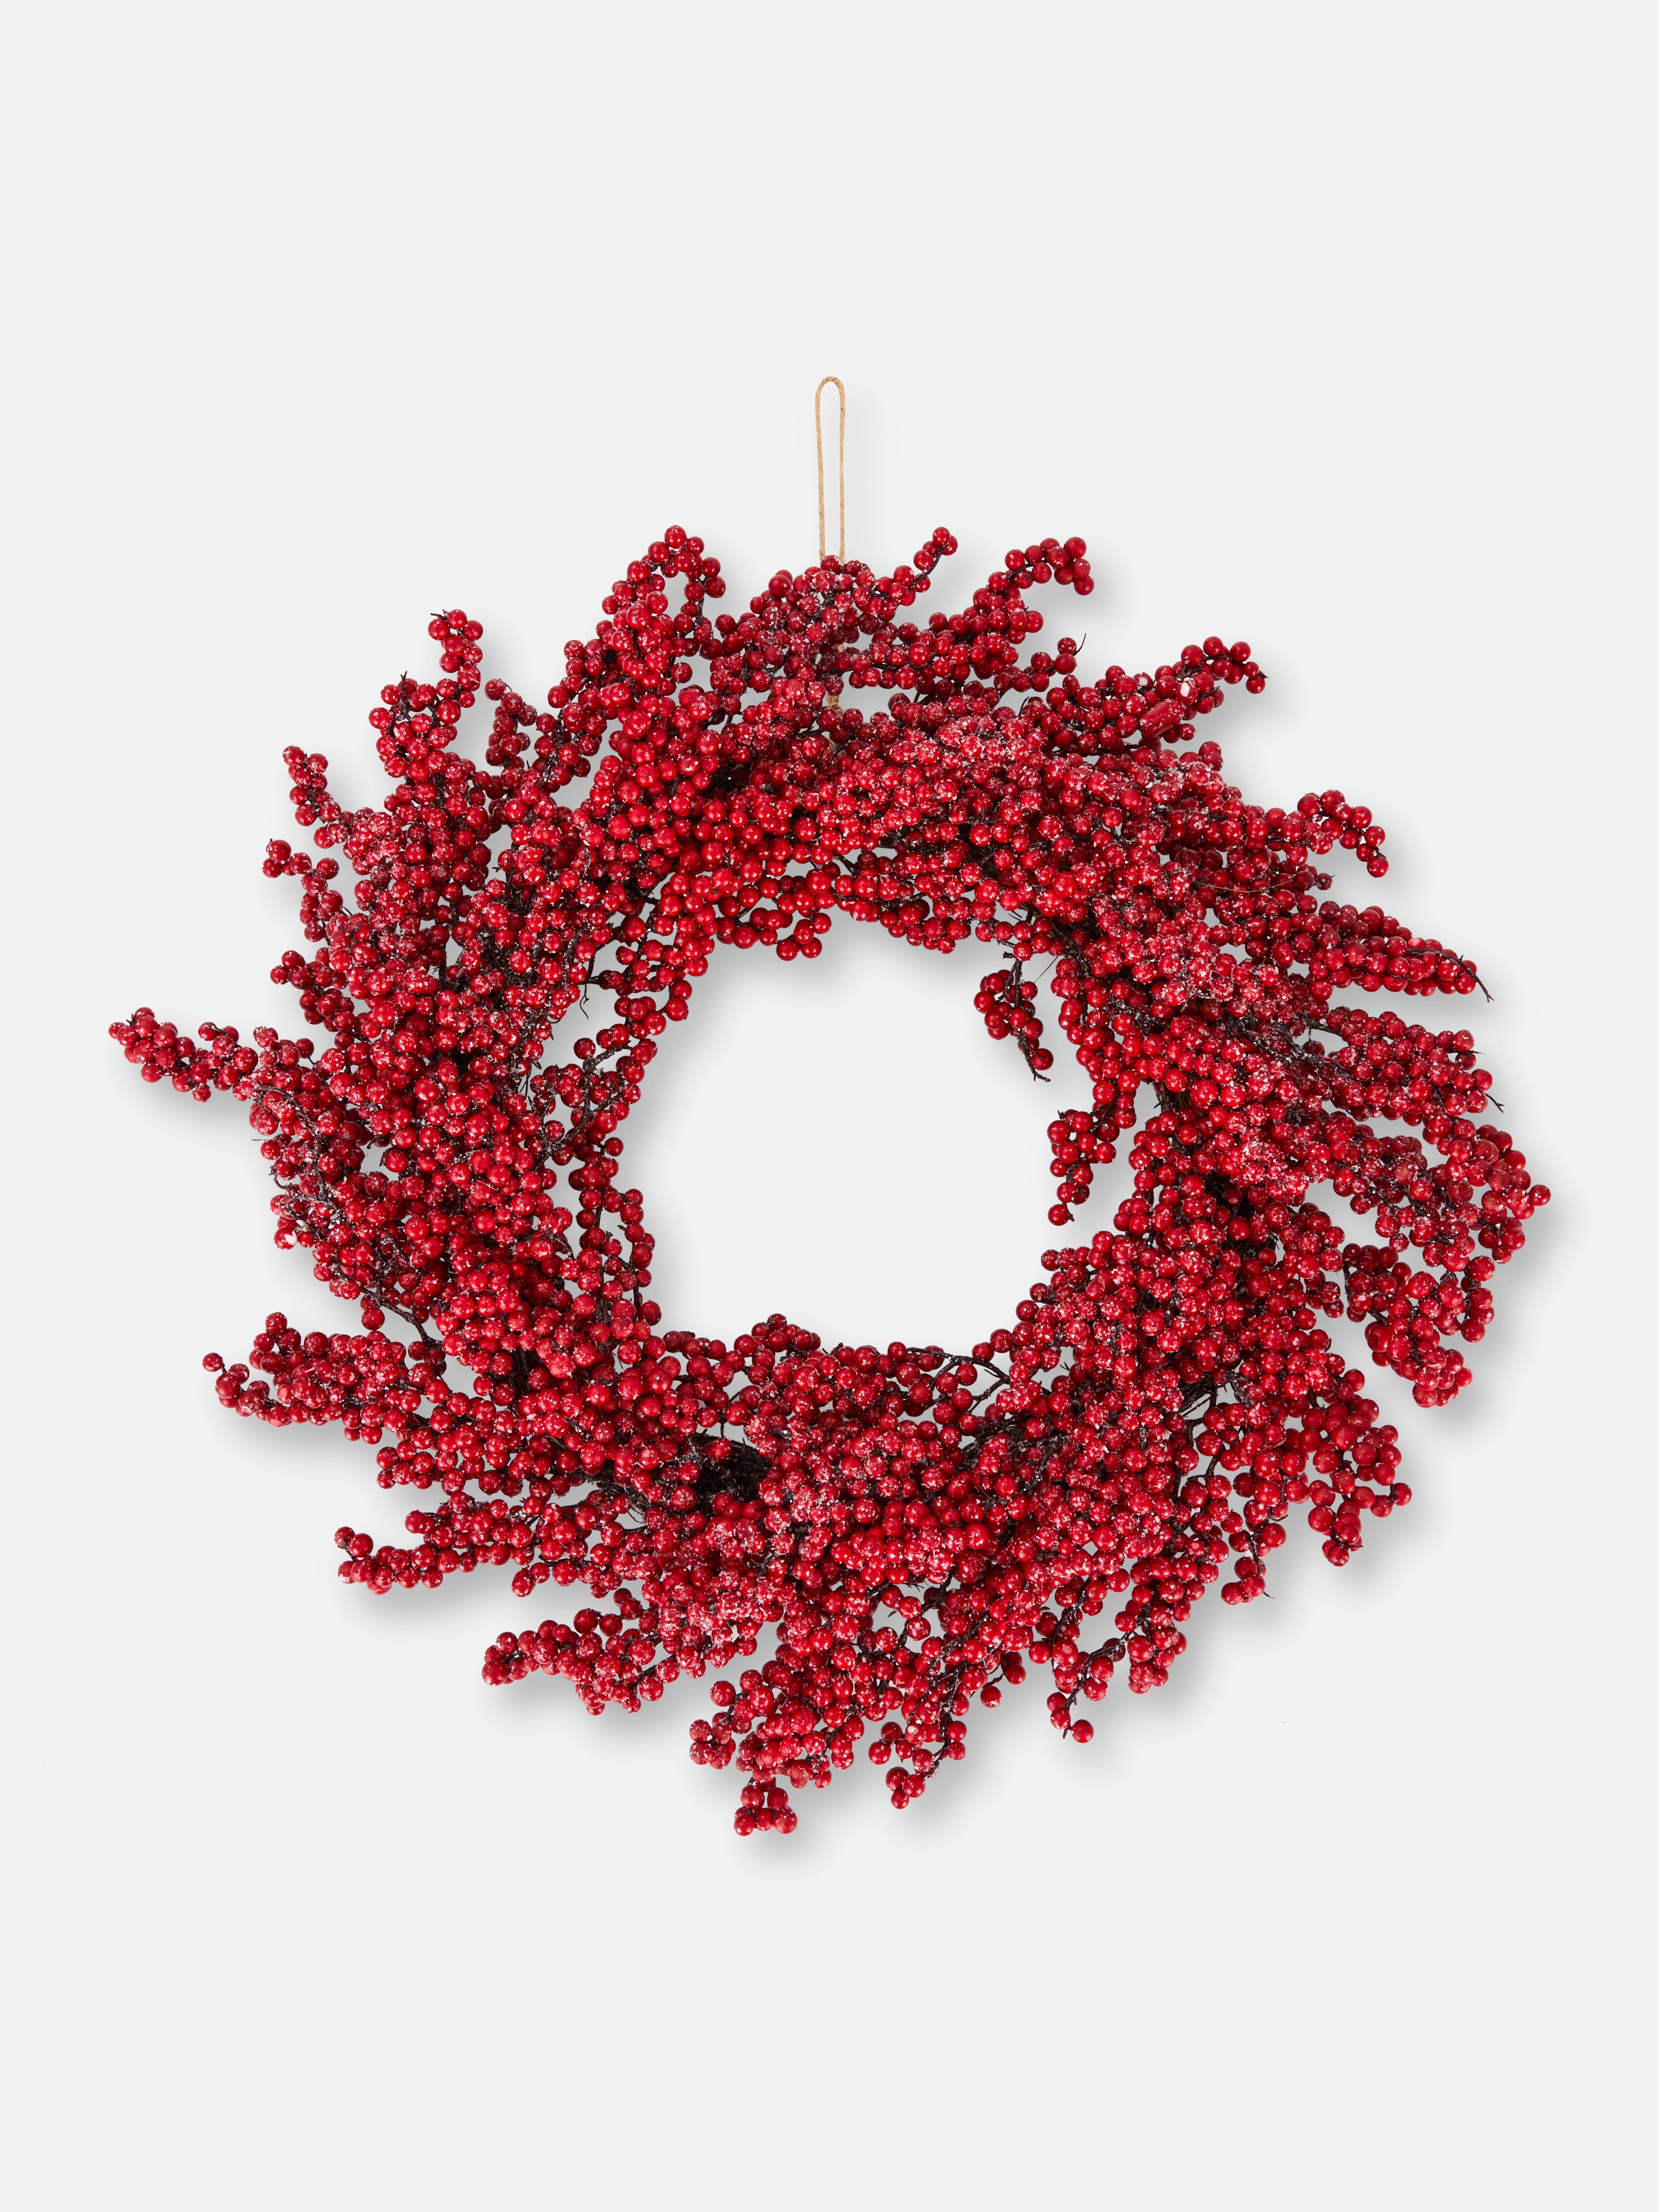 Red Berry Christmas Wreath